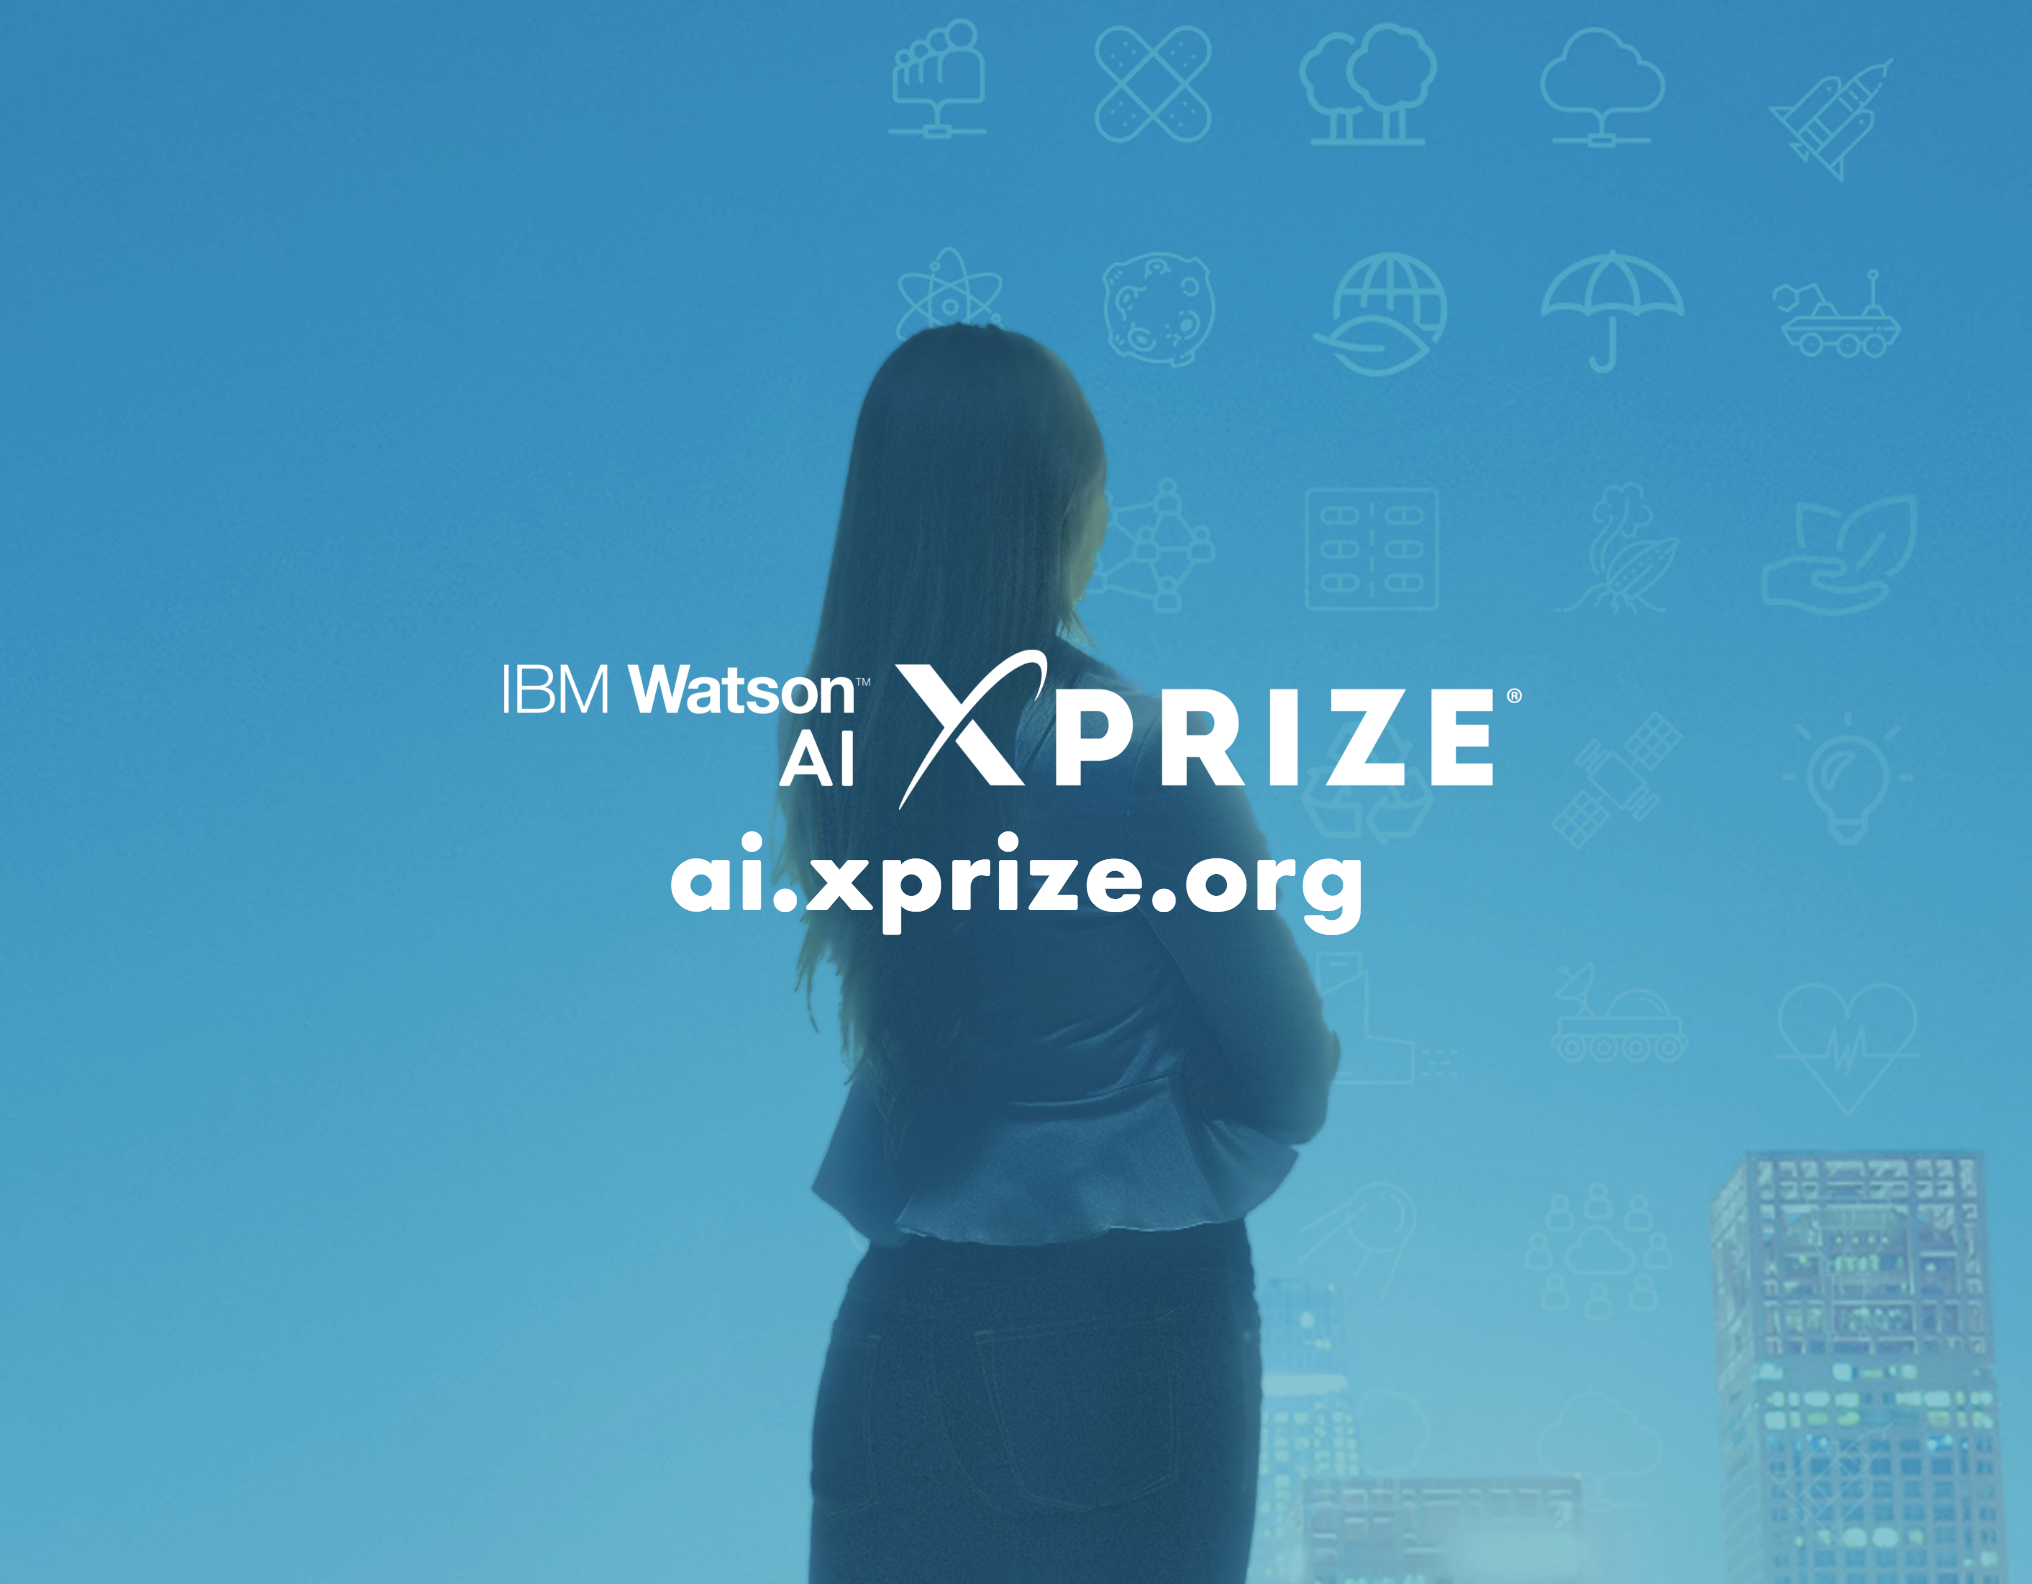 emotion AI featured in xprize competition